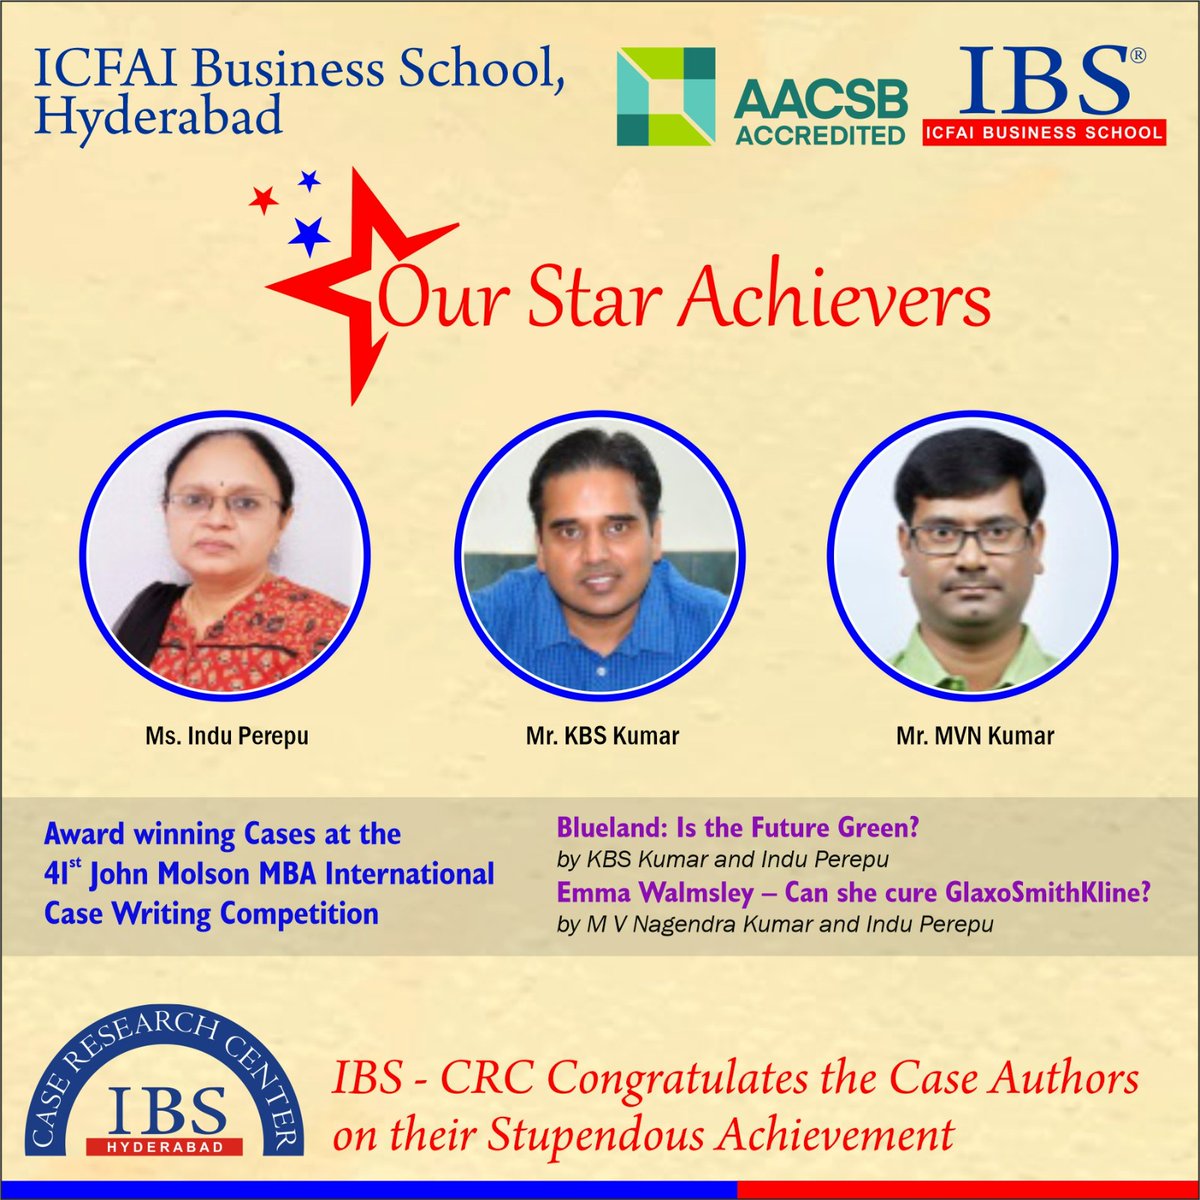 ICFAI Business School Wins Two Prizes in International Case Writing Competition.
#IBS Hyderabad #ICFAI Business School #ICFAI Group #IFHE

#CaseAward #CaseMethod #CaseTeaching #CaseWriting.